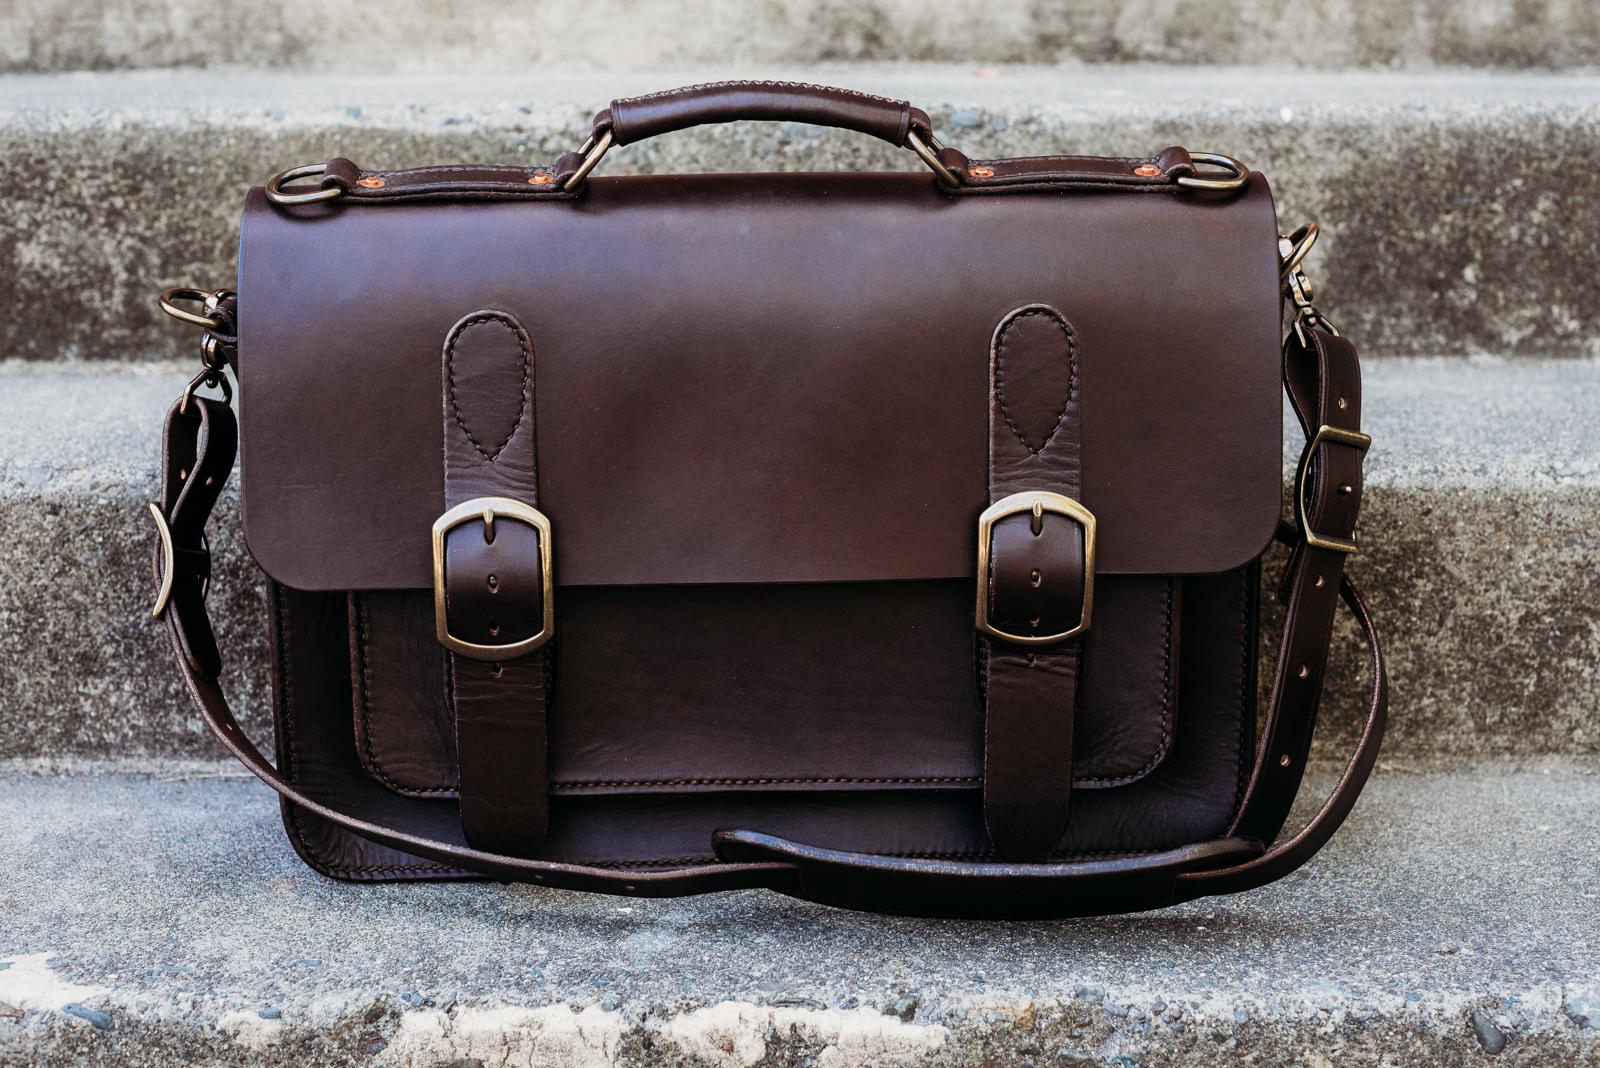 HideGear English Bridle Leather briefcase - Satchels, Luggage and ...